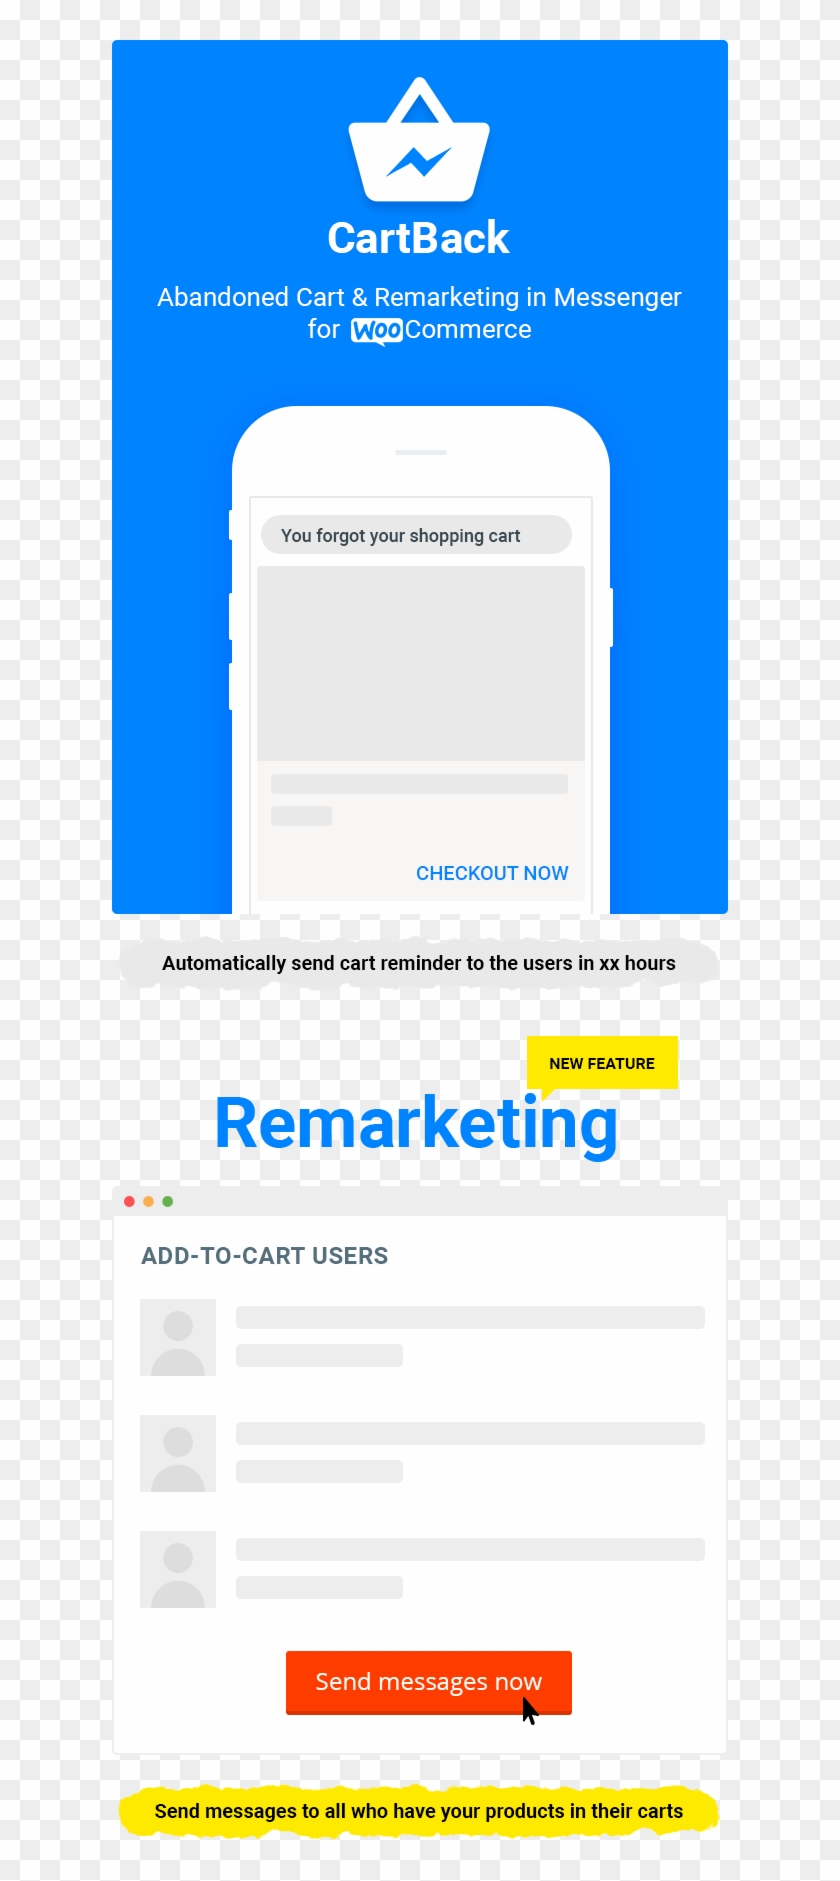 Woocommerce Abandoned Cart & Remarketing In Facebook - Article Marketing Clipart #5453805